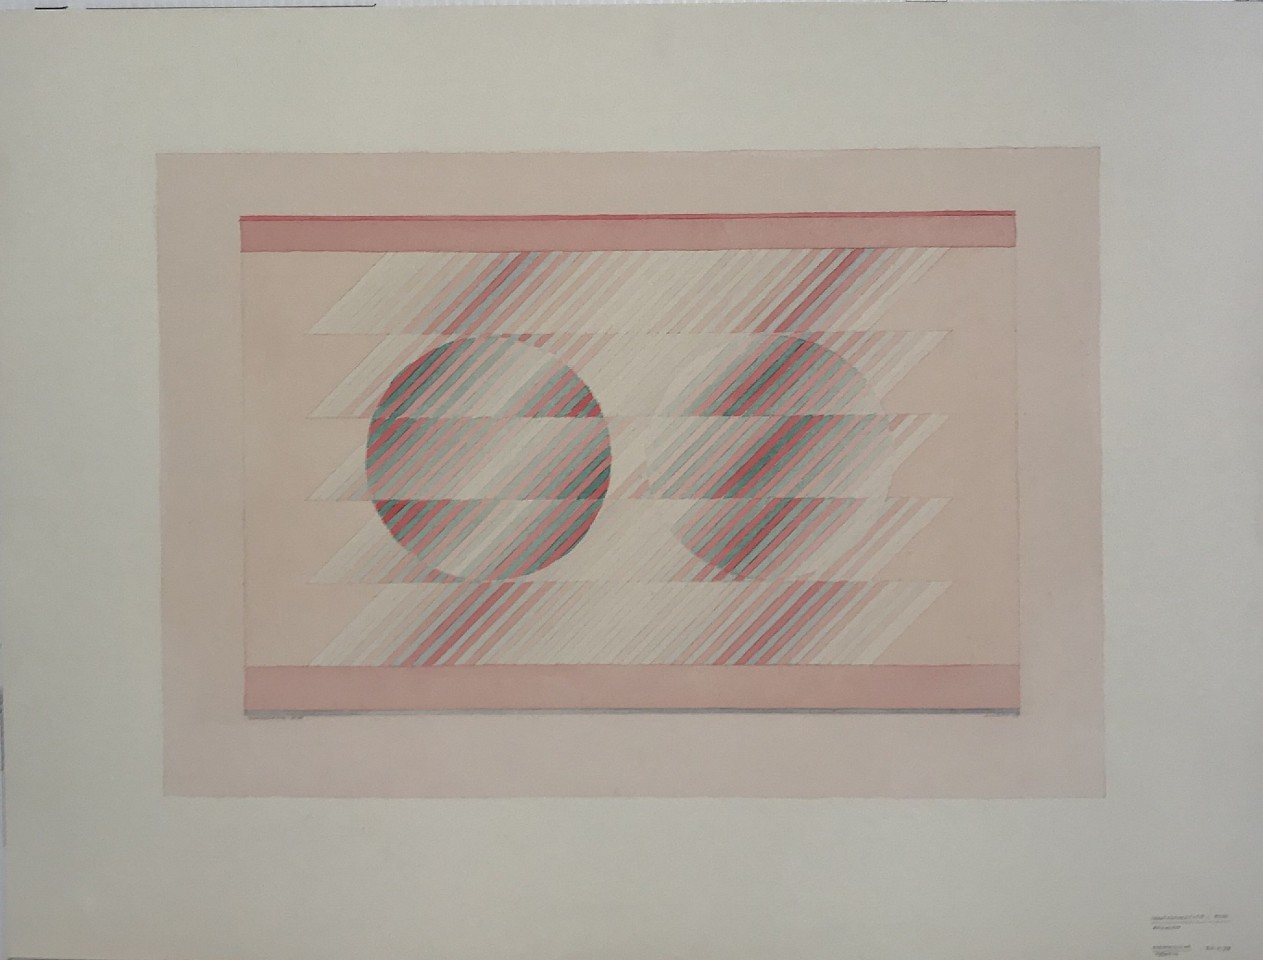 Sewell Sillman, Transformation: Echo, 1978
watercolor and pencil on paper, SS: 18"" x 24"" IS:12 1/4"" x 17 3/4""
JCA 6387
$4,500